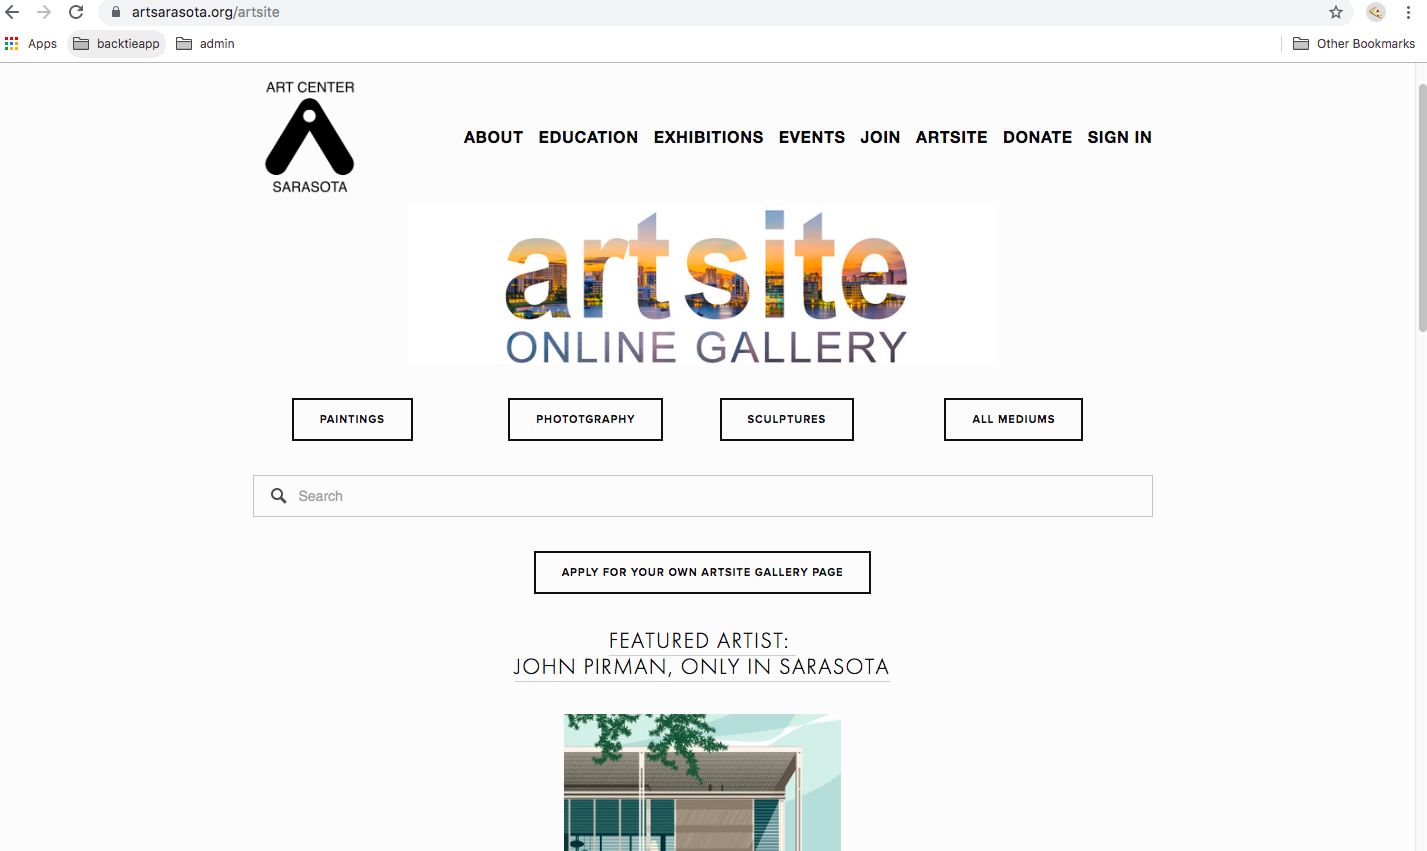 The homepage displays a featured artist and the link to apply for an artist profile. Screenshot by Niki Kottmann